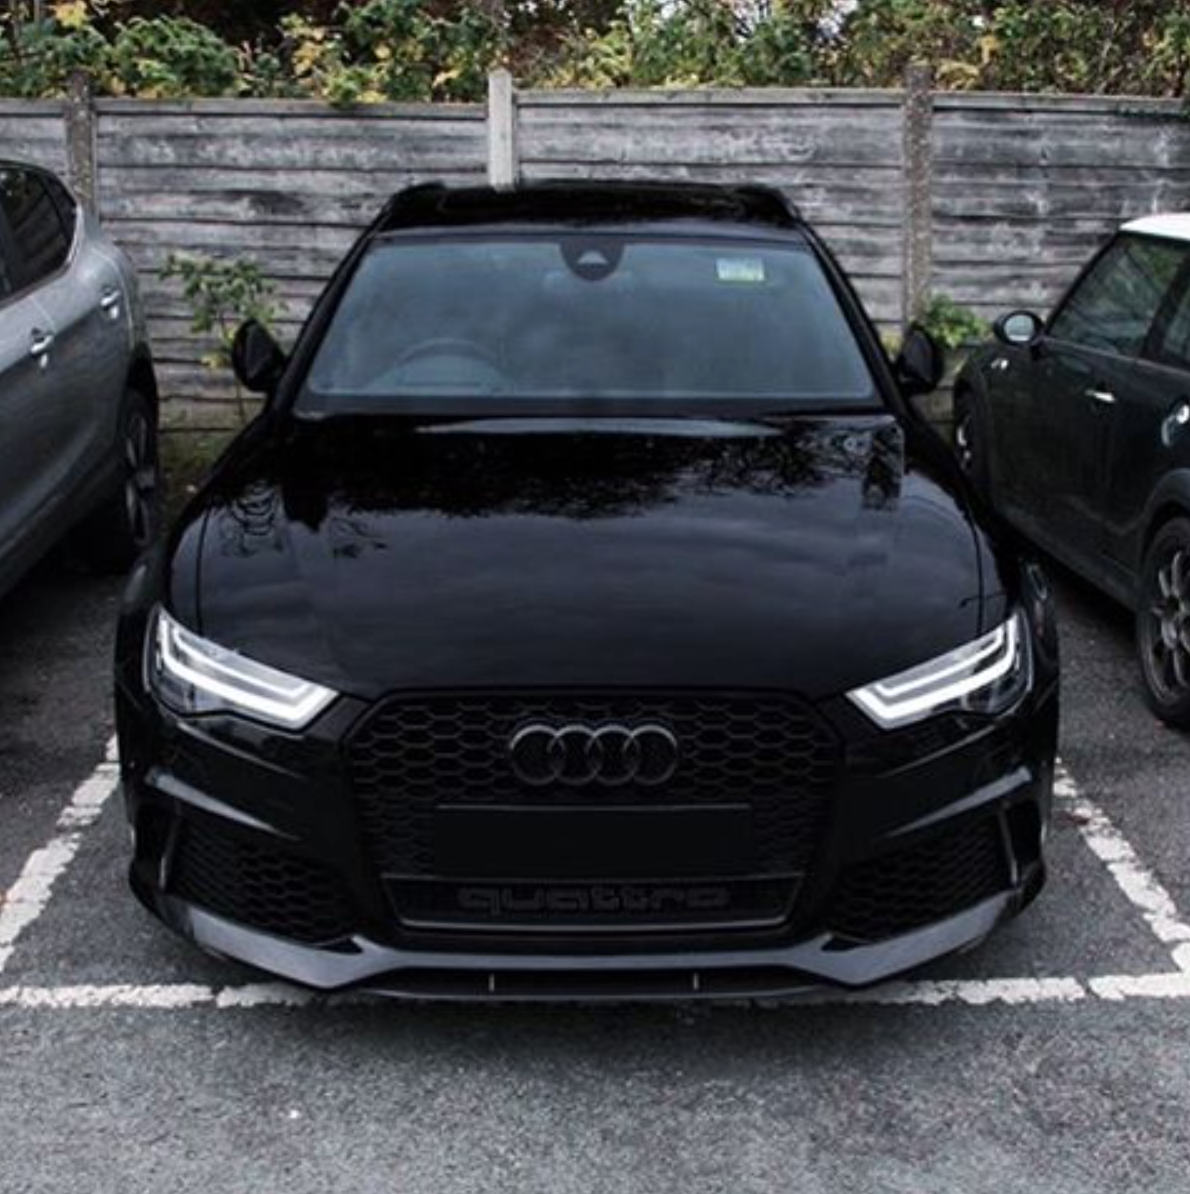 Blacked out audi rs6 ?? - scoopnest.com1190 x 1194